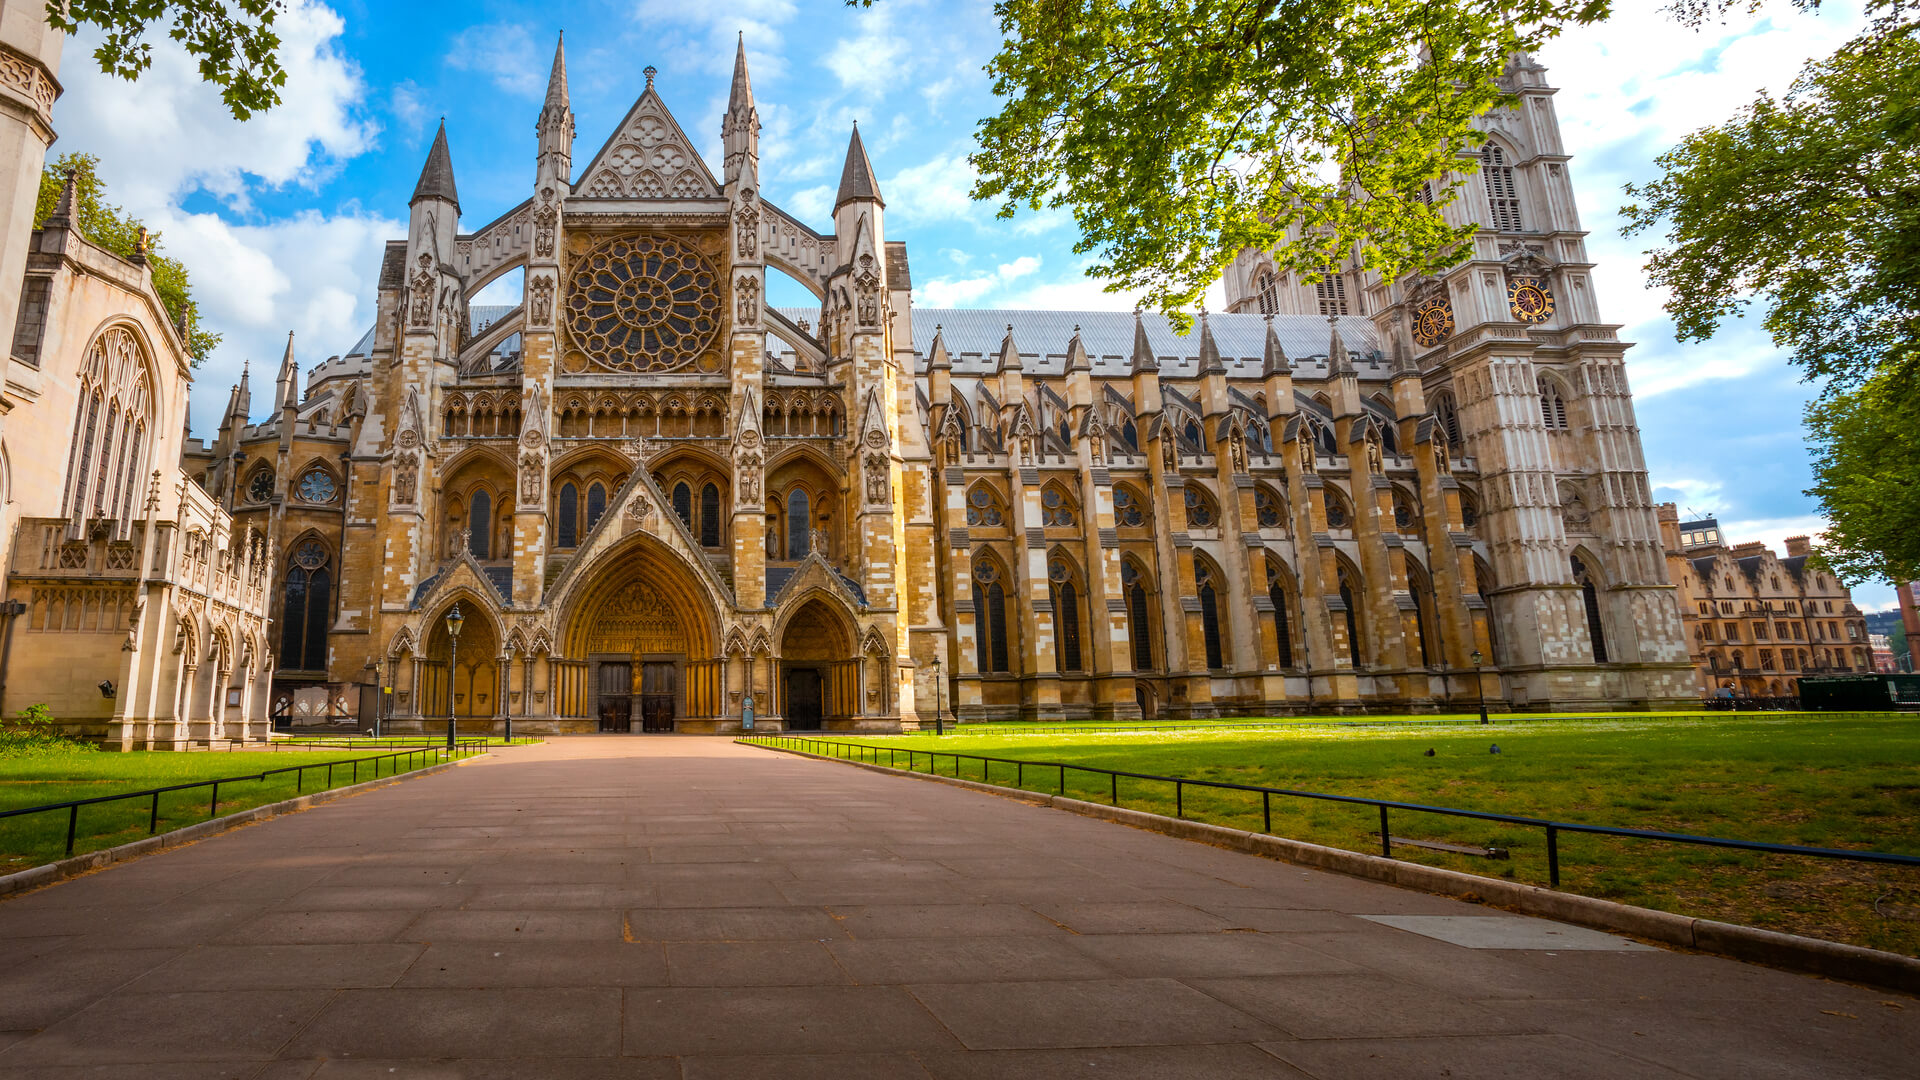 Westminster Abbey - Collegiate Church of St Peter at Westminster in London, UK